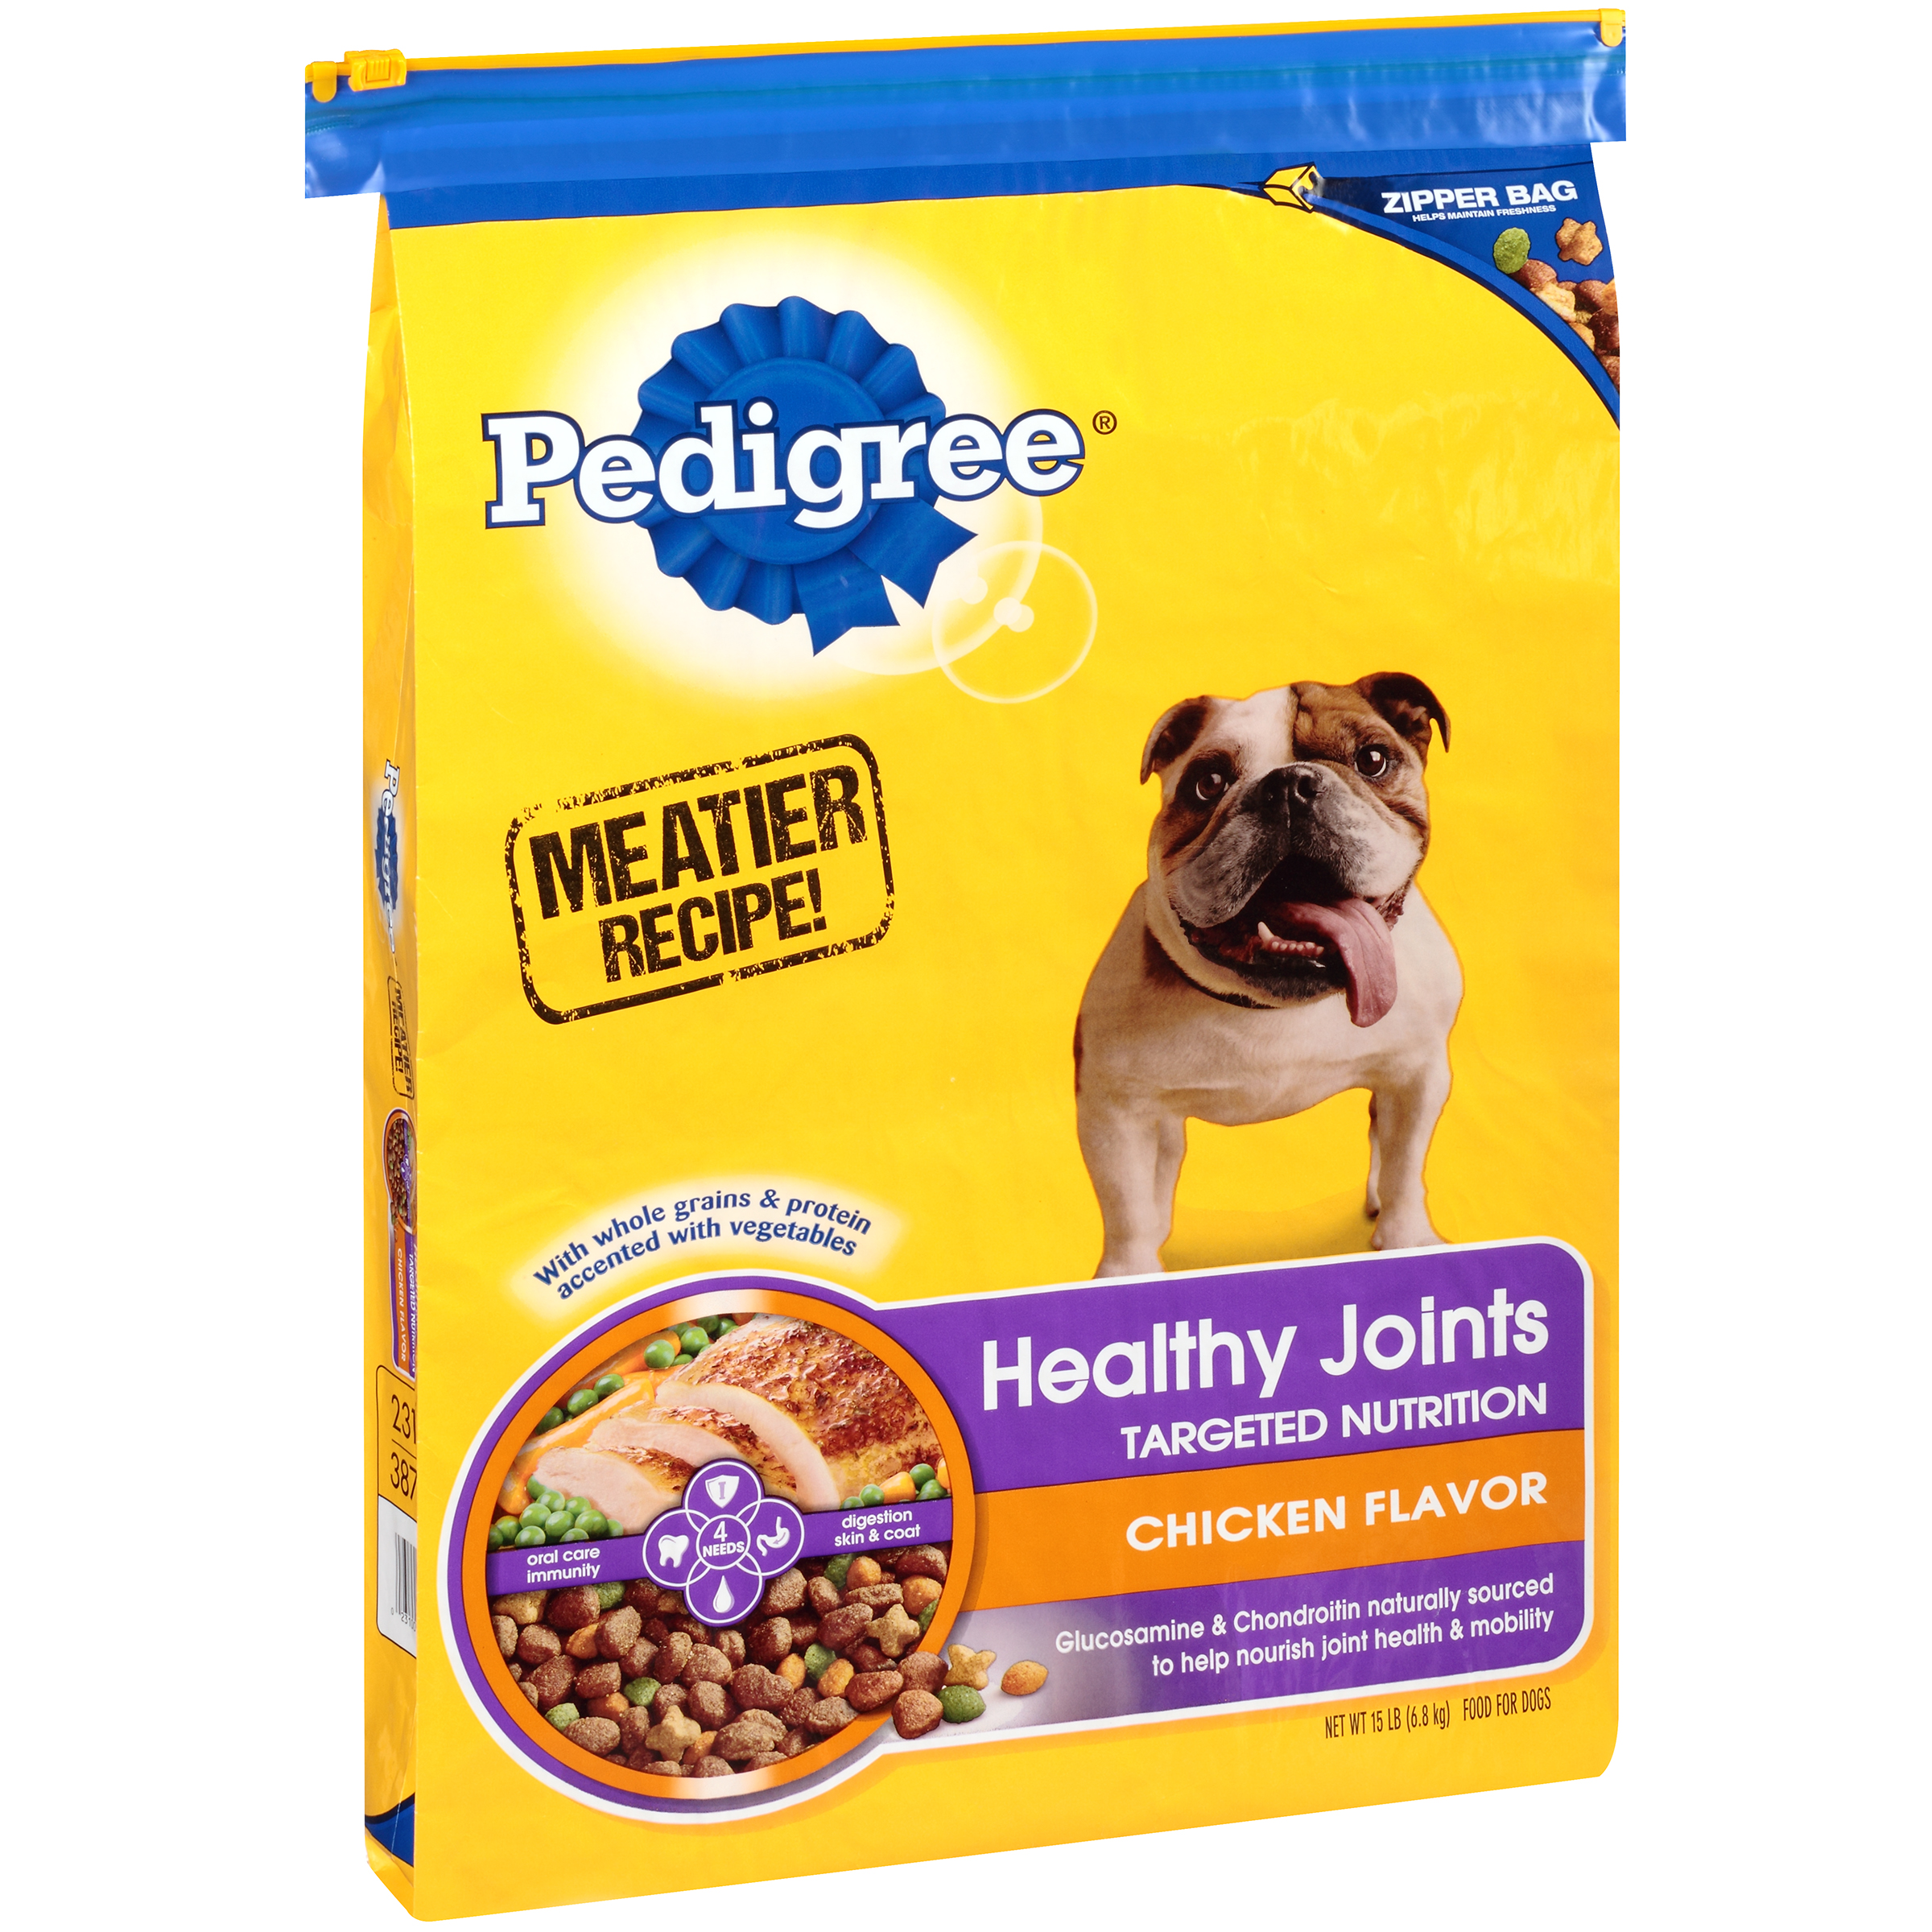 Pedigree Food for Dogs, Healthy Joints, 15 lb (6.8 kg)